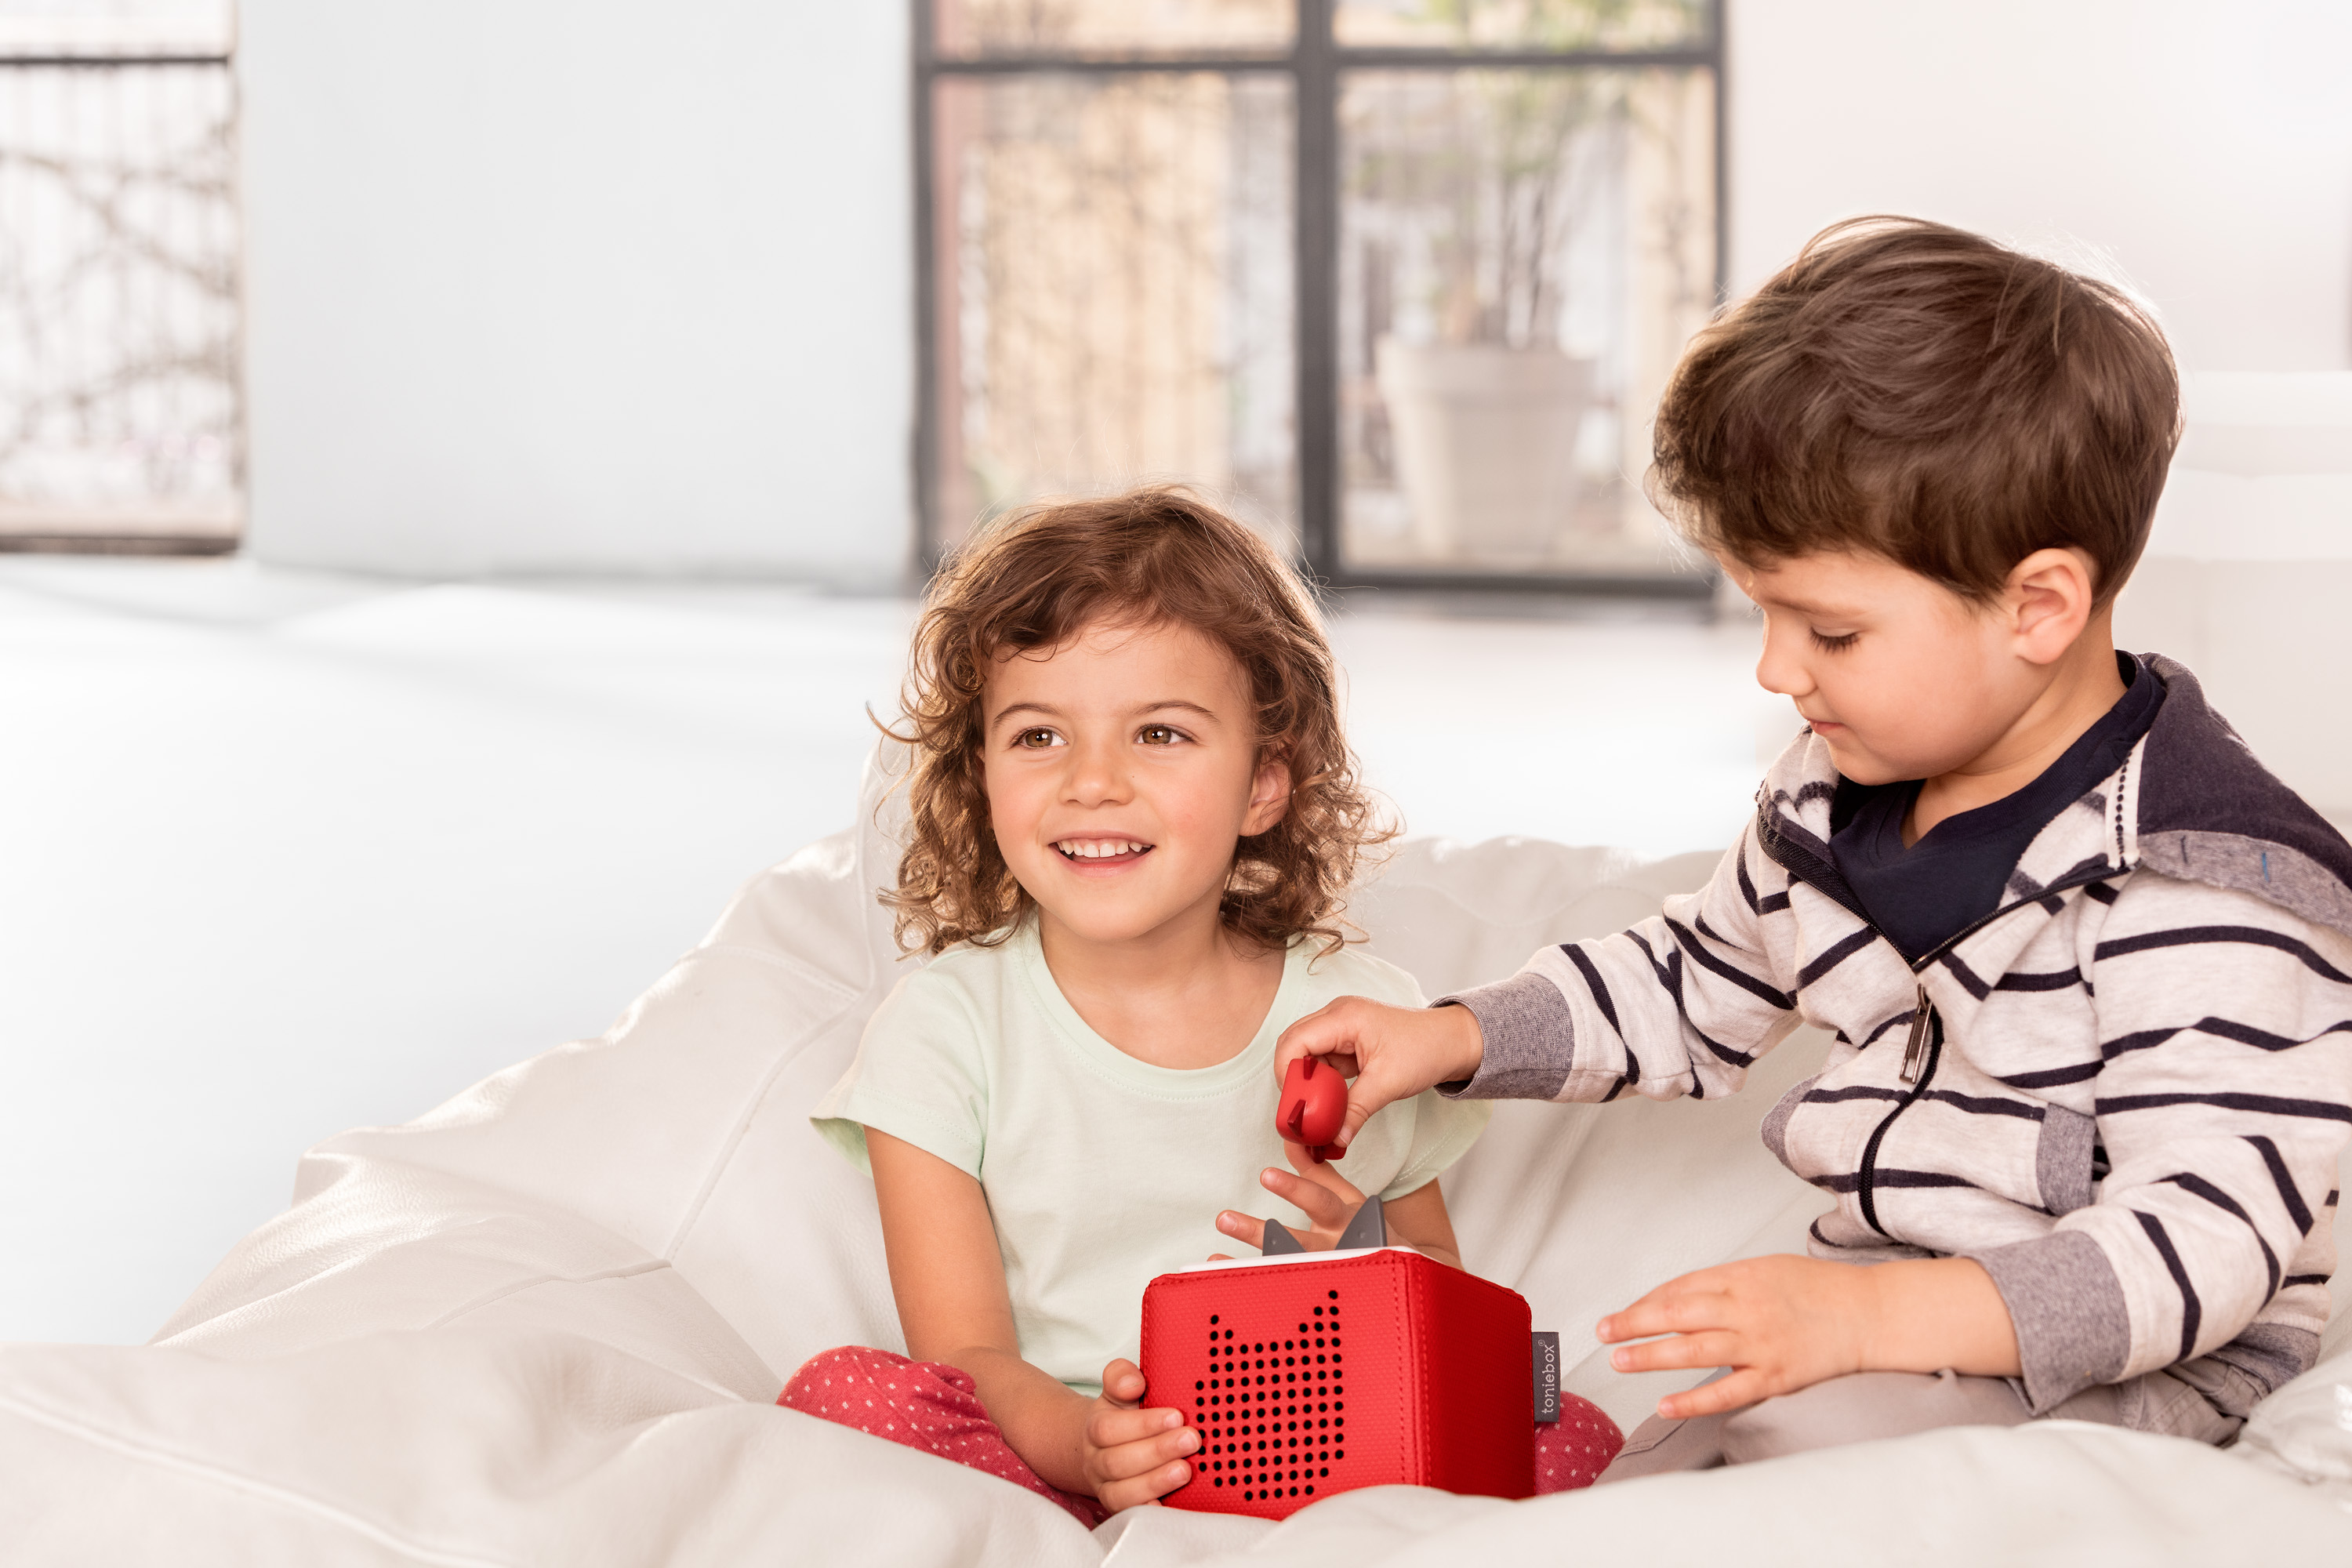 Two kids at home playing with a red Toniebox and creative Tonie figure